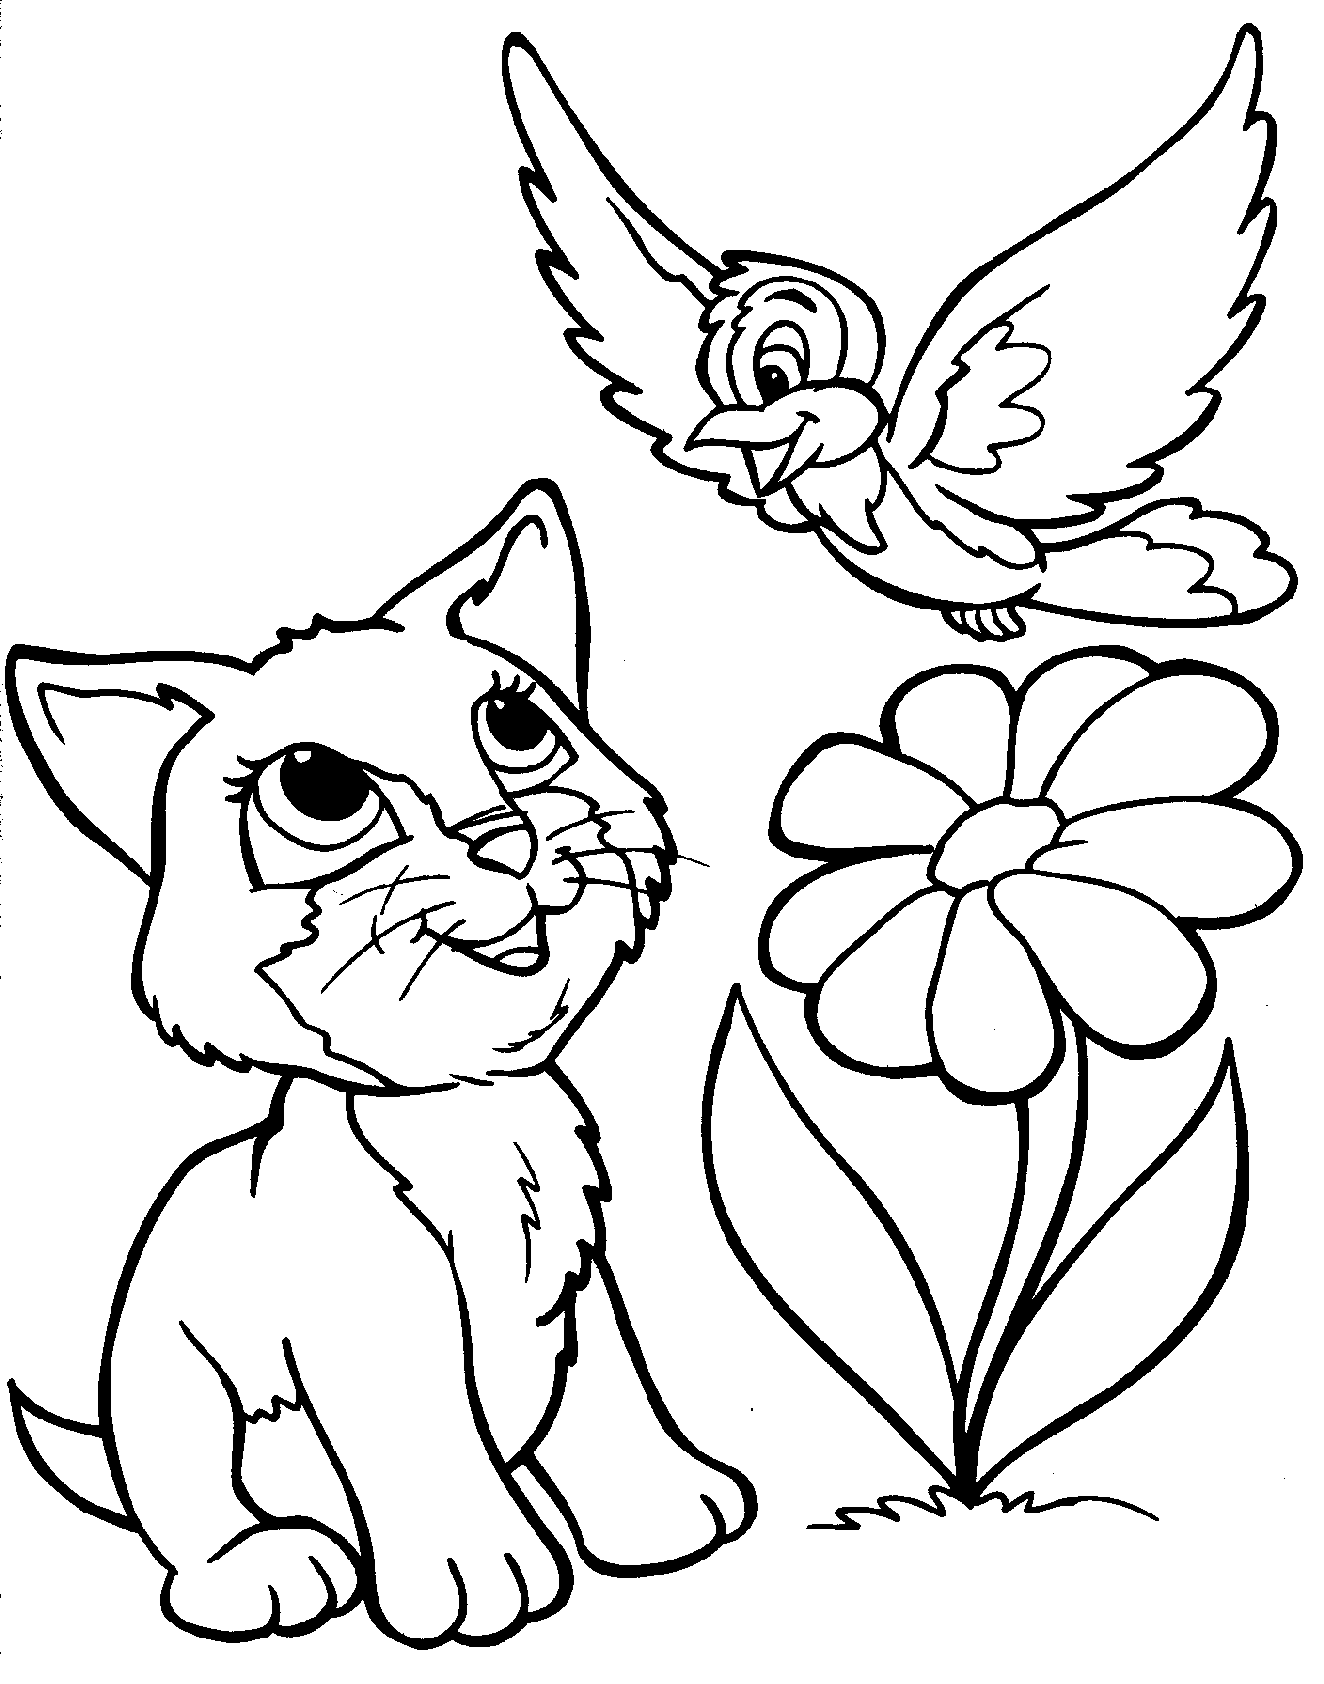 Kittens - Coloring Pages for Kids and for Adults